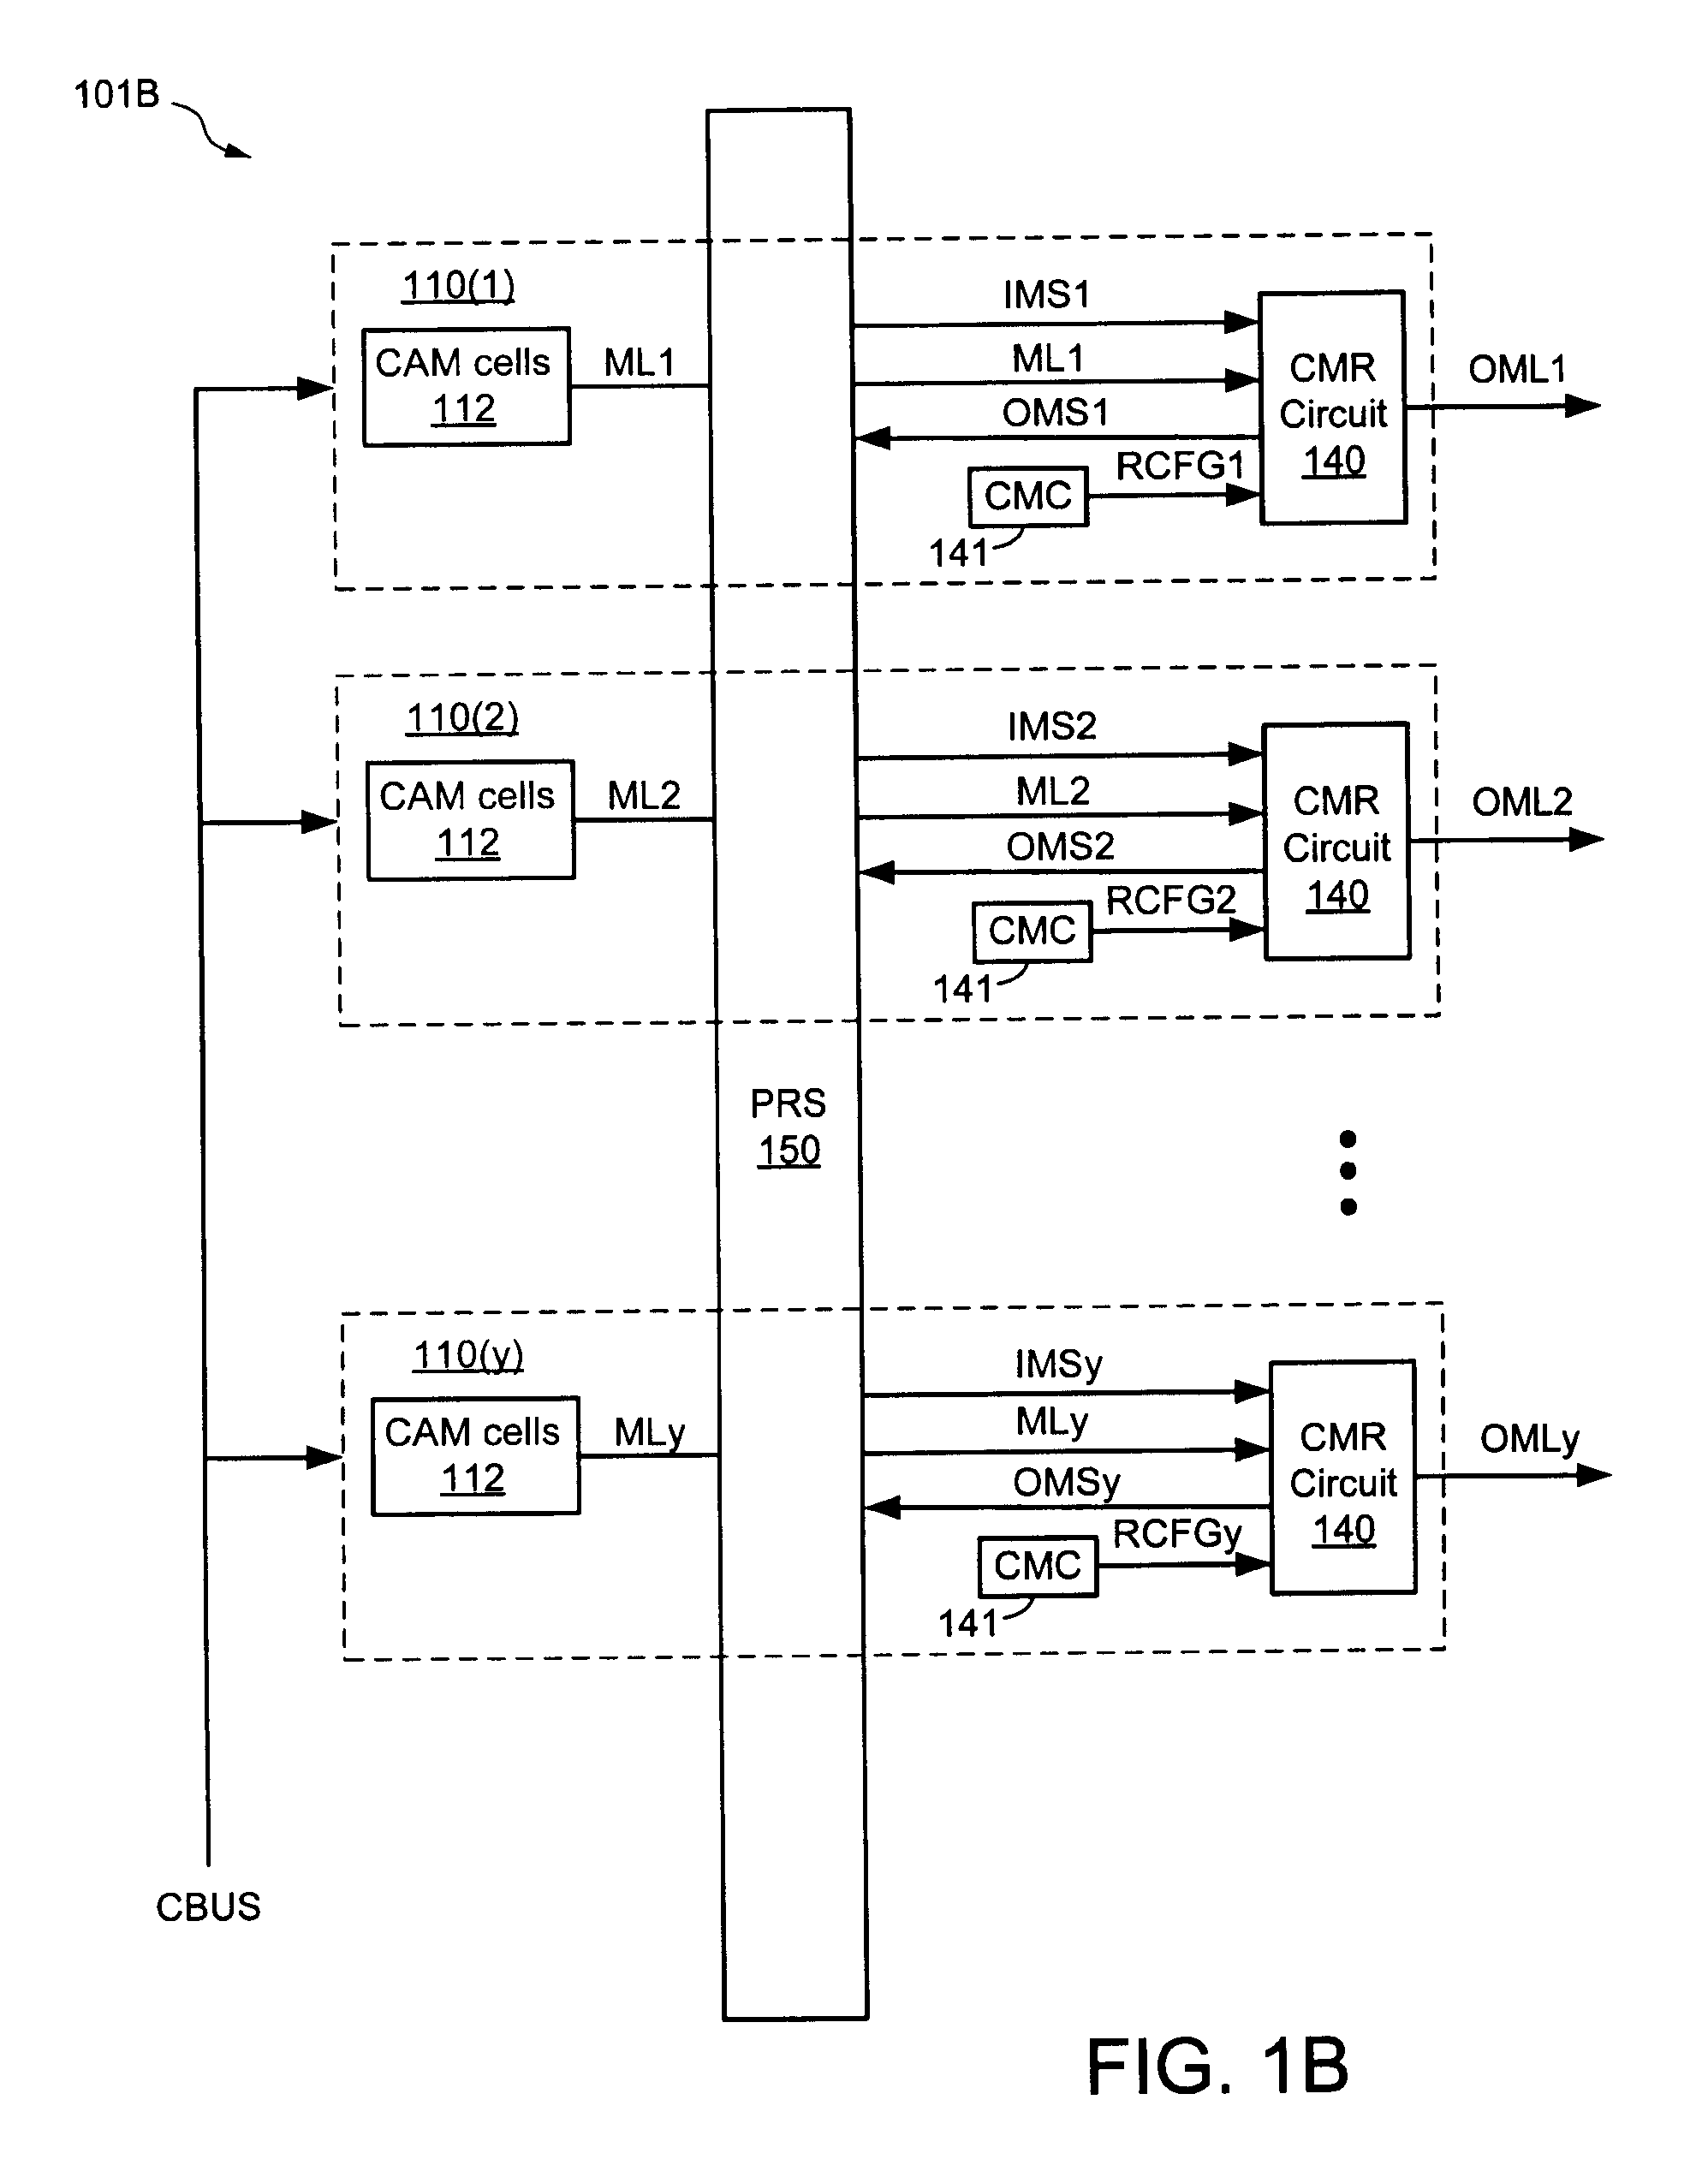 Content addresable memory having selectively interconnected counter circuits